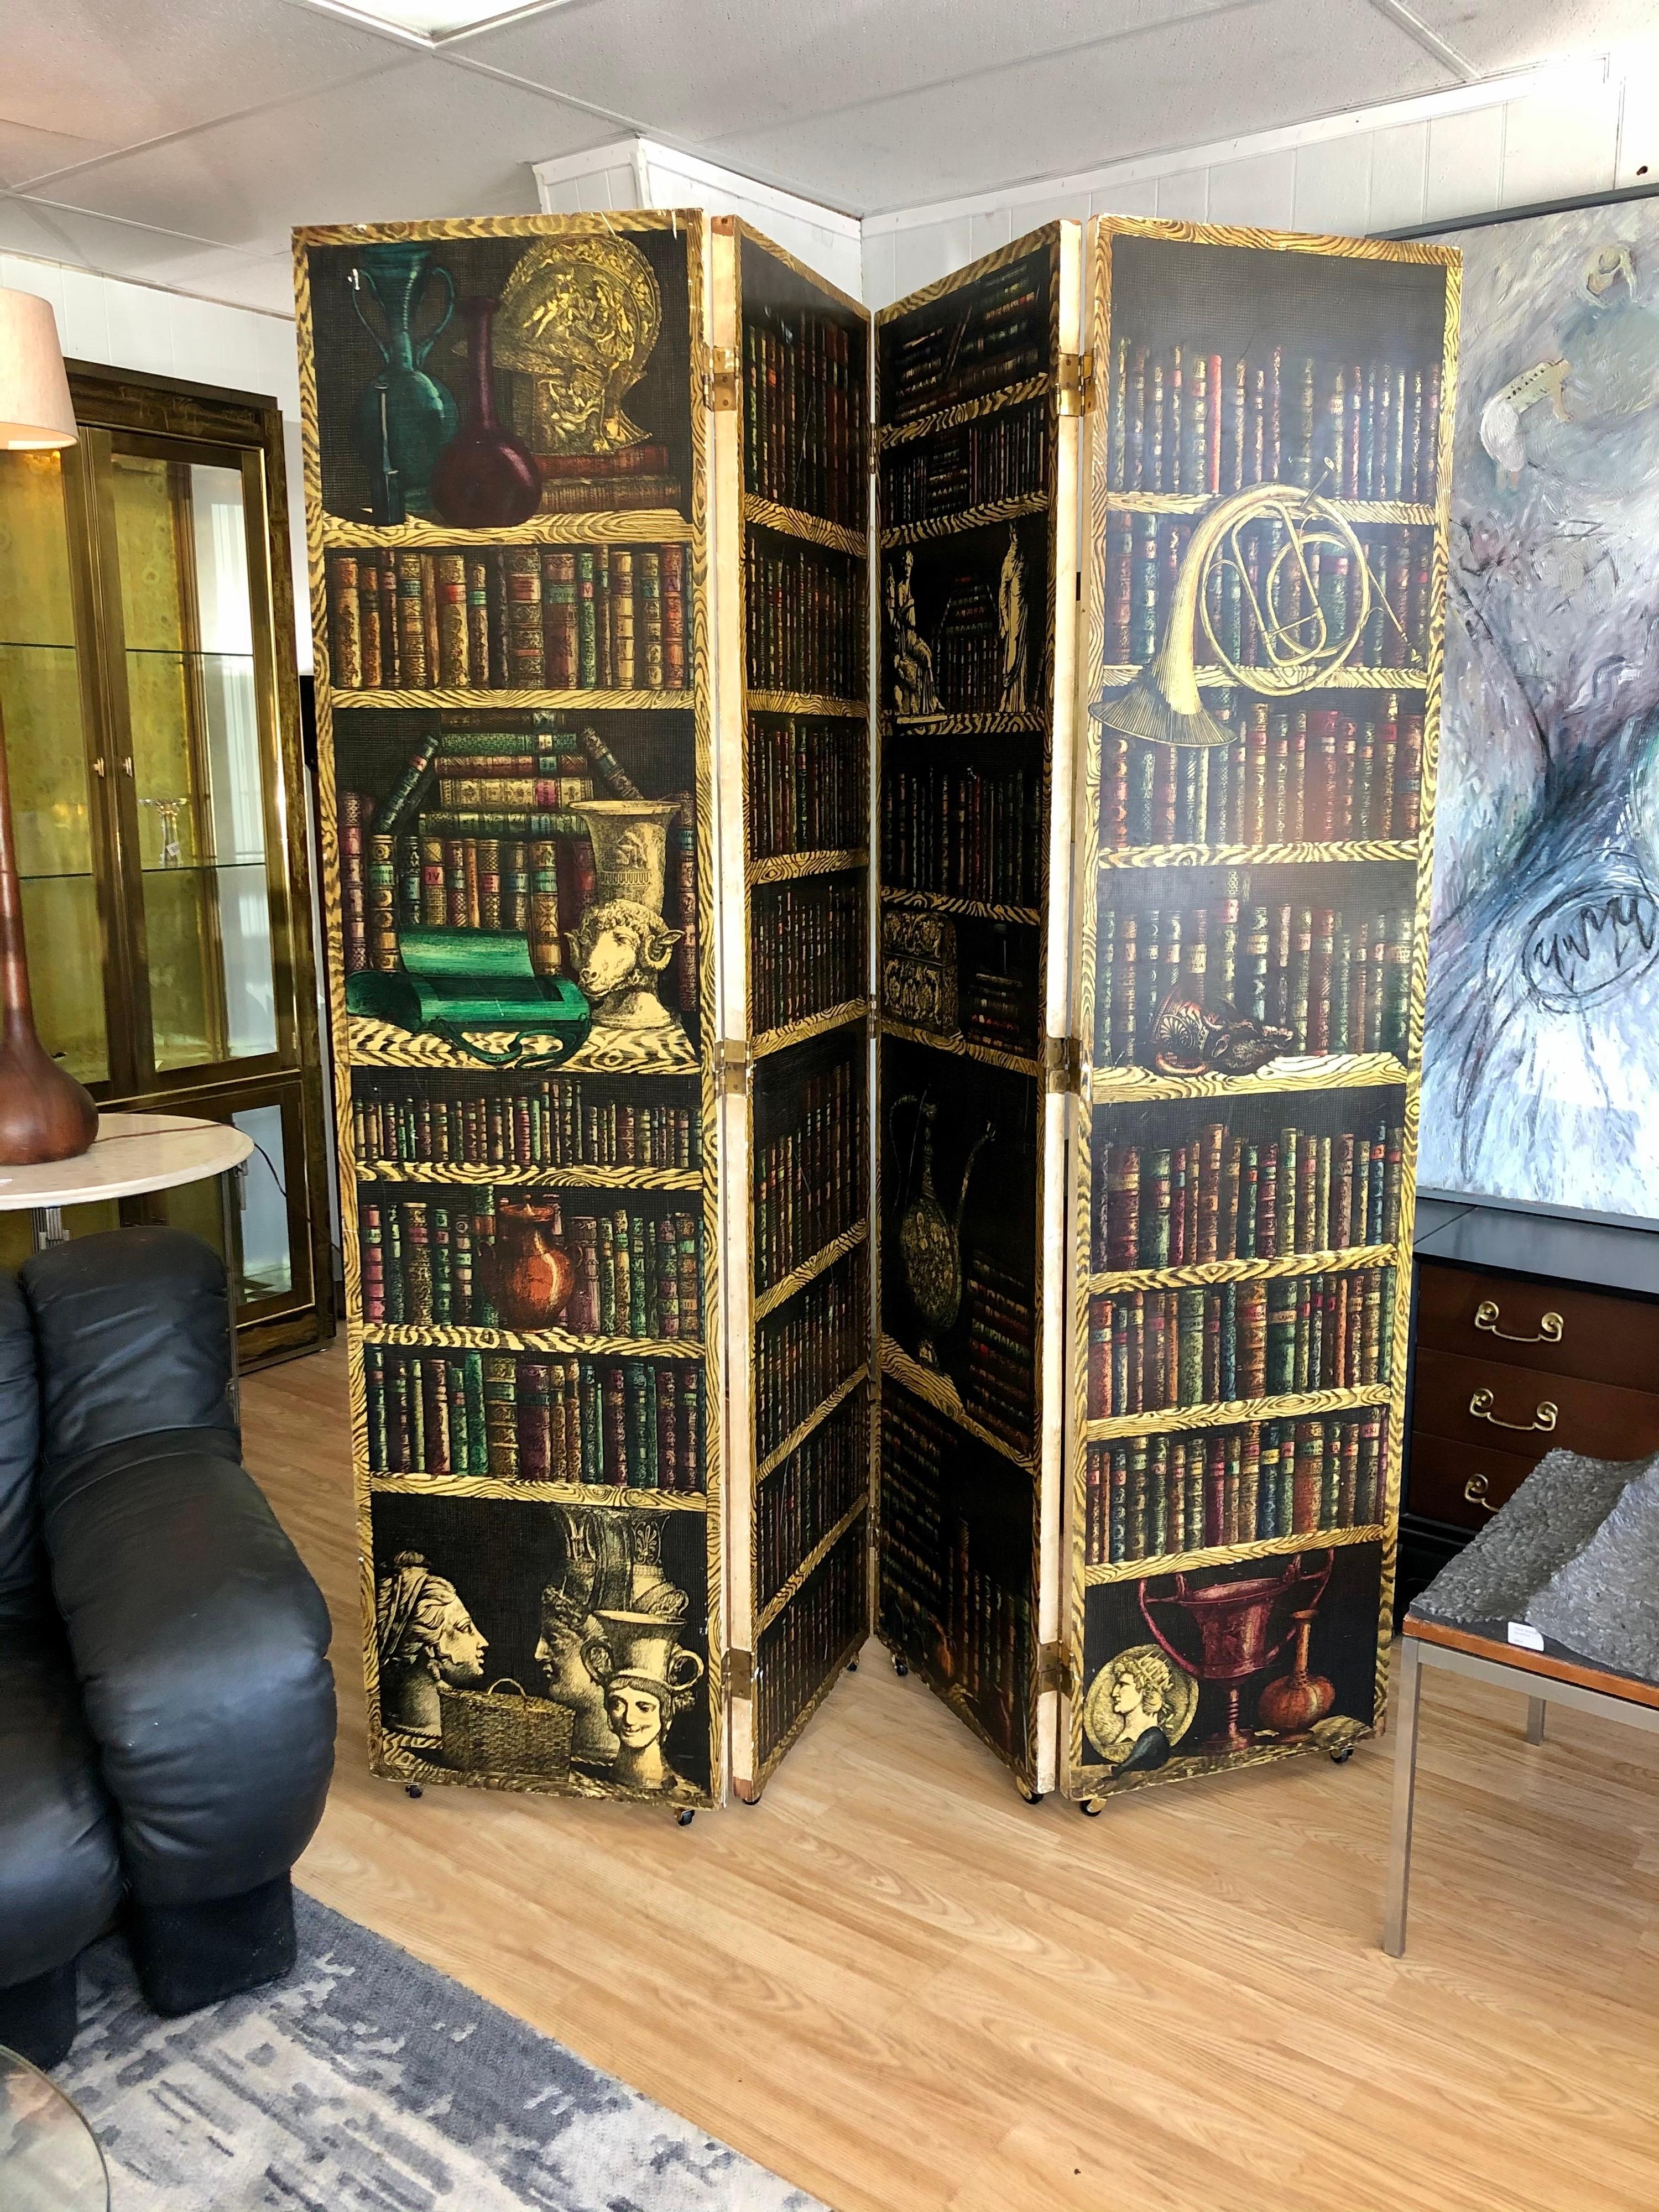 Designed by artist Piero Fornasetti, this four panel folding screen is in overall good condition. Panels depict library filled with books and other objects on shelves and on the reverse a monochromatic scene with busts and drapery. Several scuffs